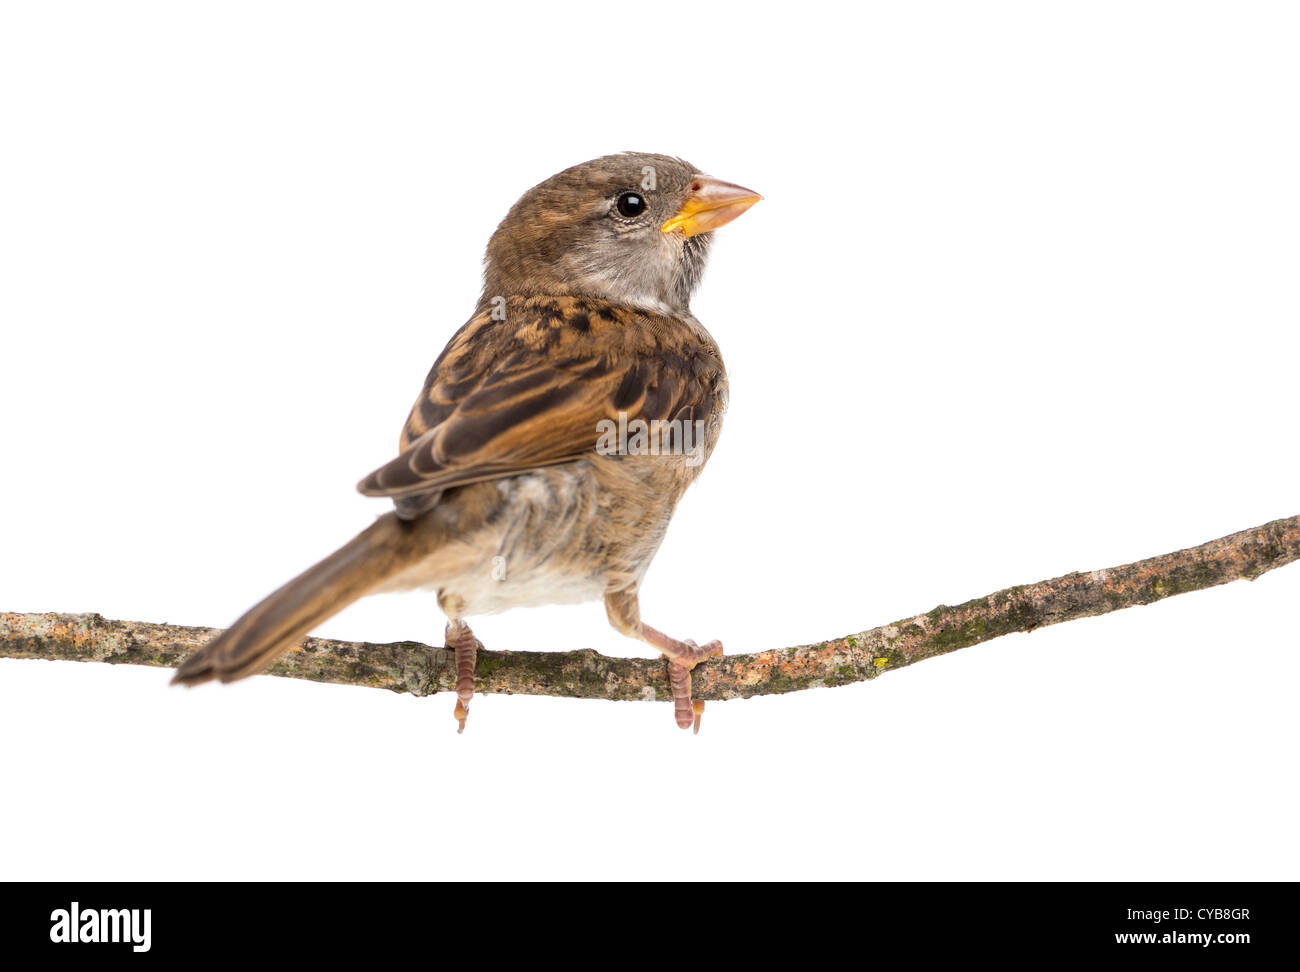 Female House Sparrow, Passer domesticus, on branch against white background Stock Photo